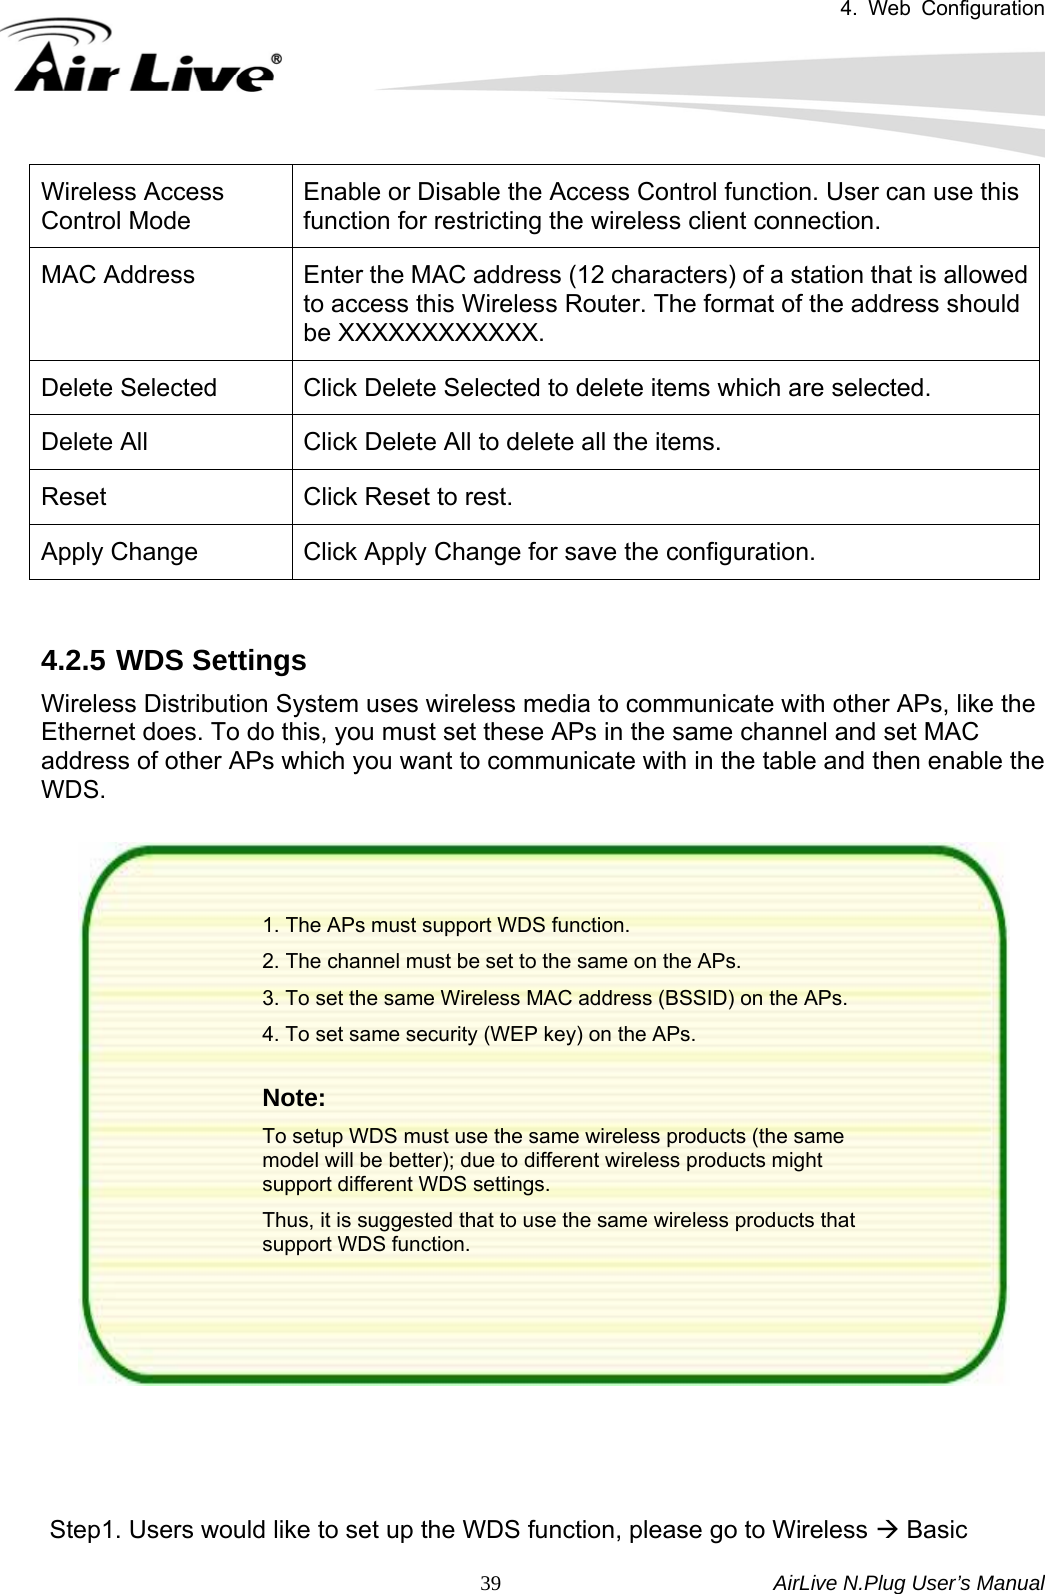 4. Web Configuration       AirLive N.Plug User’s Manual  39Wireless Access Control Mode Enable or Disable the Access Control function. User can use this function for restricting the wireless client connection. MAC Address  Enter the MAC address (12 characters) of a station that is allowed to access this Wireless Router. The format of the address should be XXXXXXXXXXXX. Delete Selected  Click Delete Selected to delete items which are selected. Delete All  Click Delete All to delete all the items. Reset  Click Reset to rest. Apply Change  Click Apply Change for save the configuration.  4.2.5 WDS Settings Wireless Distribution System uses wireless media to communicate with other APs, like the Ethernet does. To do this, you must set these APs in the same channel and set MAC address of other APs which you want to communicate with in the table and then enable the WDS.  1. The APs must support WDS function. 2. The channel must be set to the same on the APs. 3. To set the same Wireless MAC address (BSSID) on the APs. 4. To set same security (WEP key) on the APs.  Note: To setup WDS must use the same wireless products (the same model will be better); due to different wireless products might support different WDS settings. Thus, it is suggested that to use the same wireless products that support WDS function.               Step1. Users would like to set up the WDS function, please go to Wireless Æ Basic 